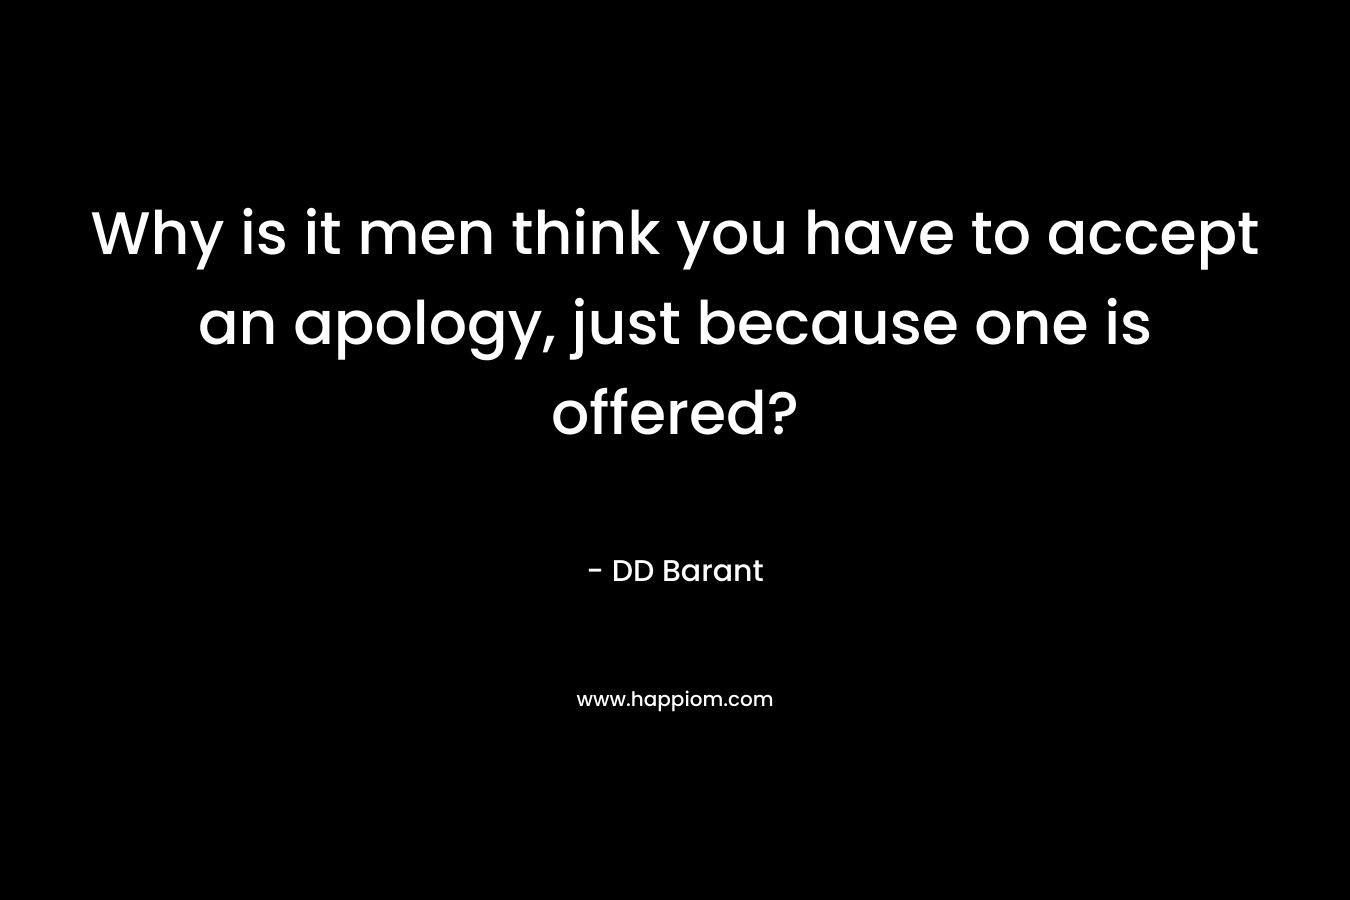 Why is it men think you have to accept an apology, just because one is offered? – DD Barant